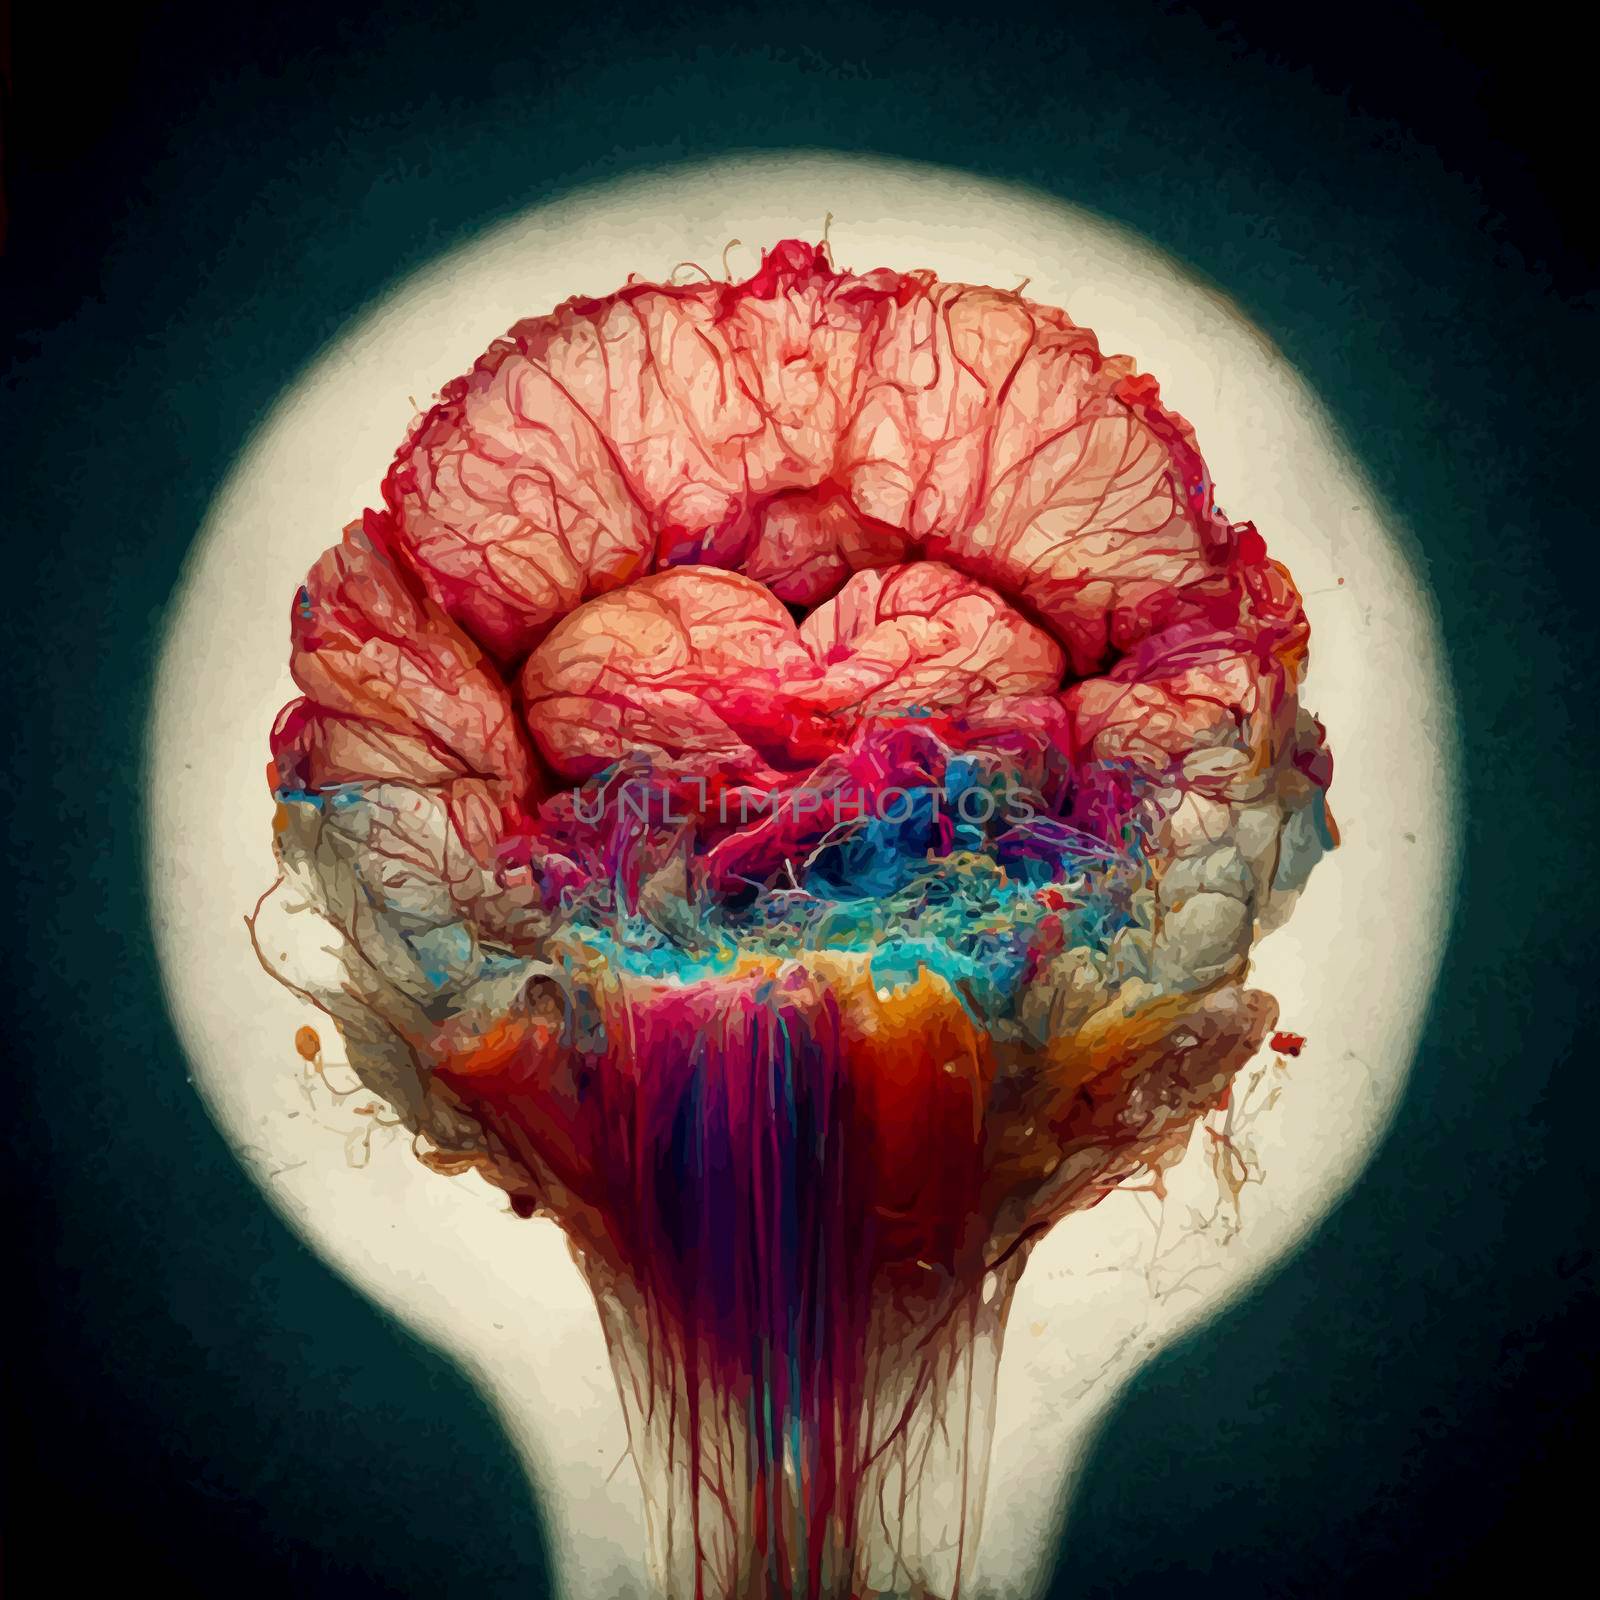 realistic illustration of the human brain. parts of the brain